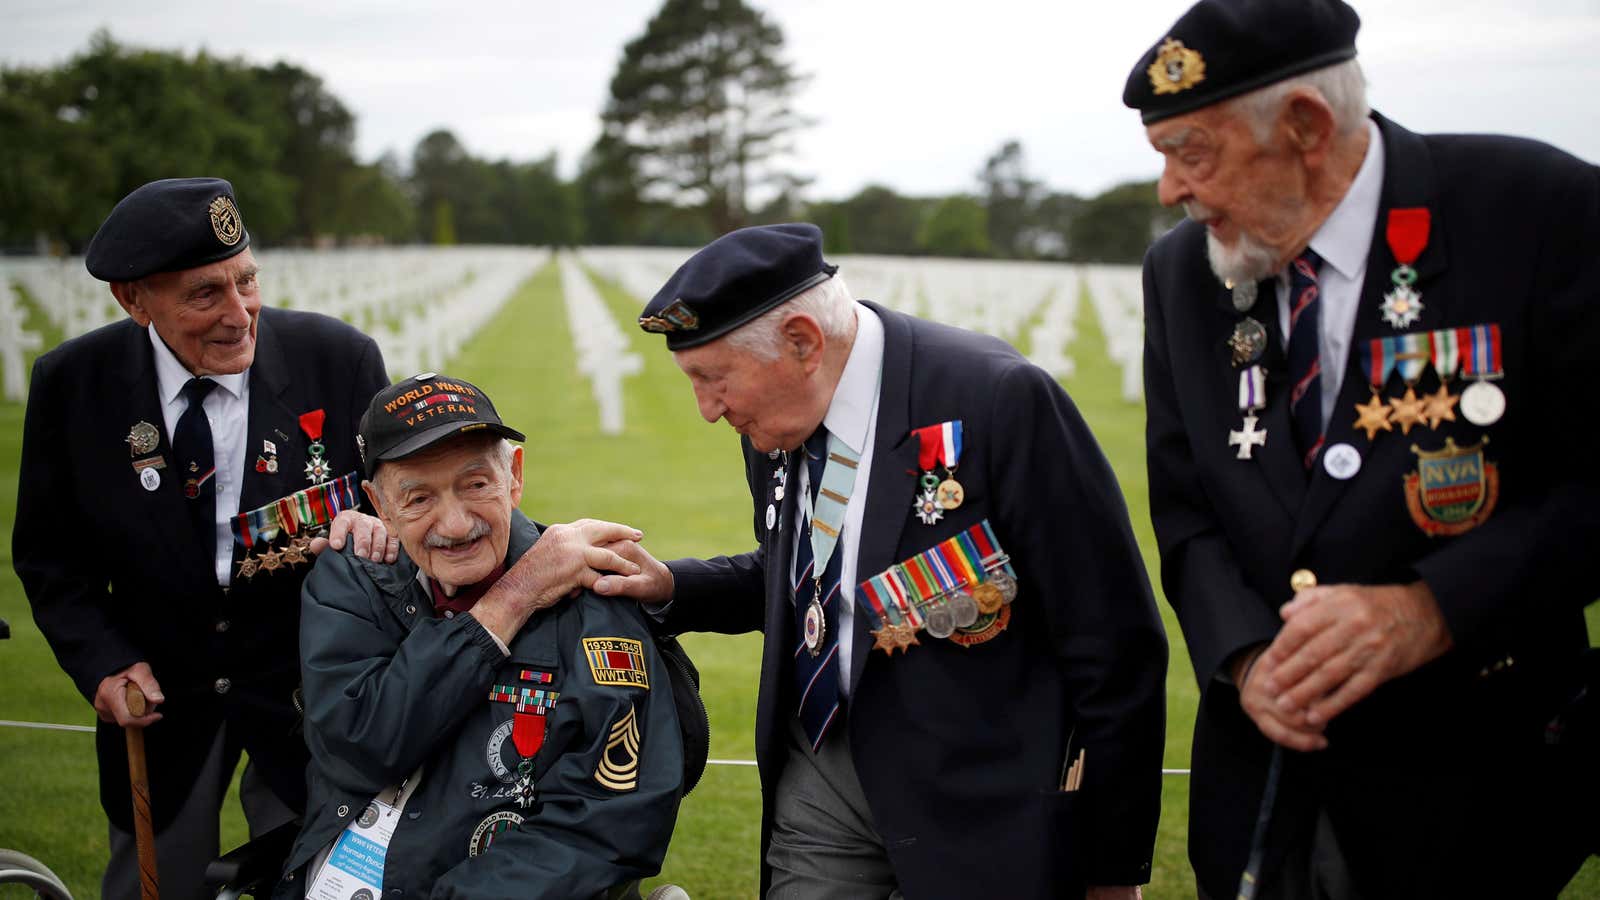 Photos of WW II veterans gathering to commemorate DDay in France